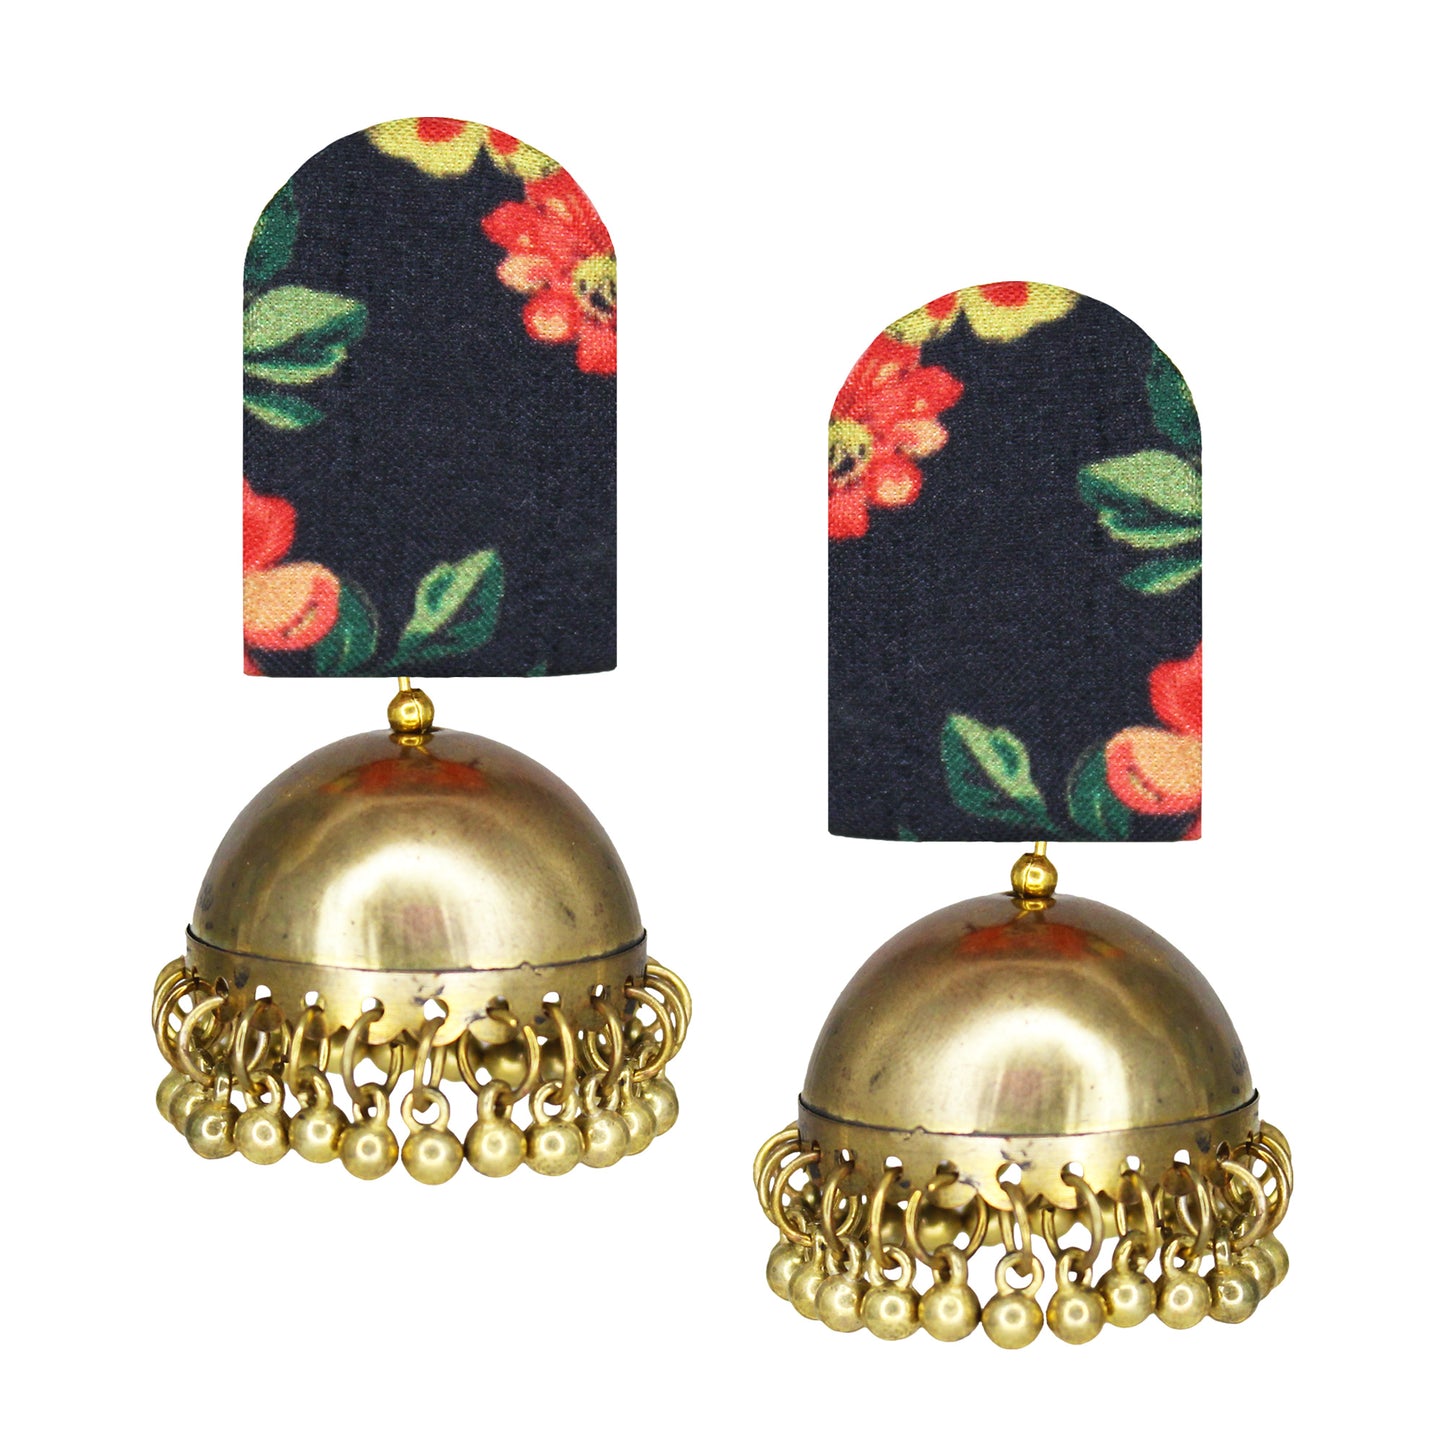 Organic Vibes Handmade Unique Black Floral Print With Golden Jhumki Fabric Earrings For Women